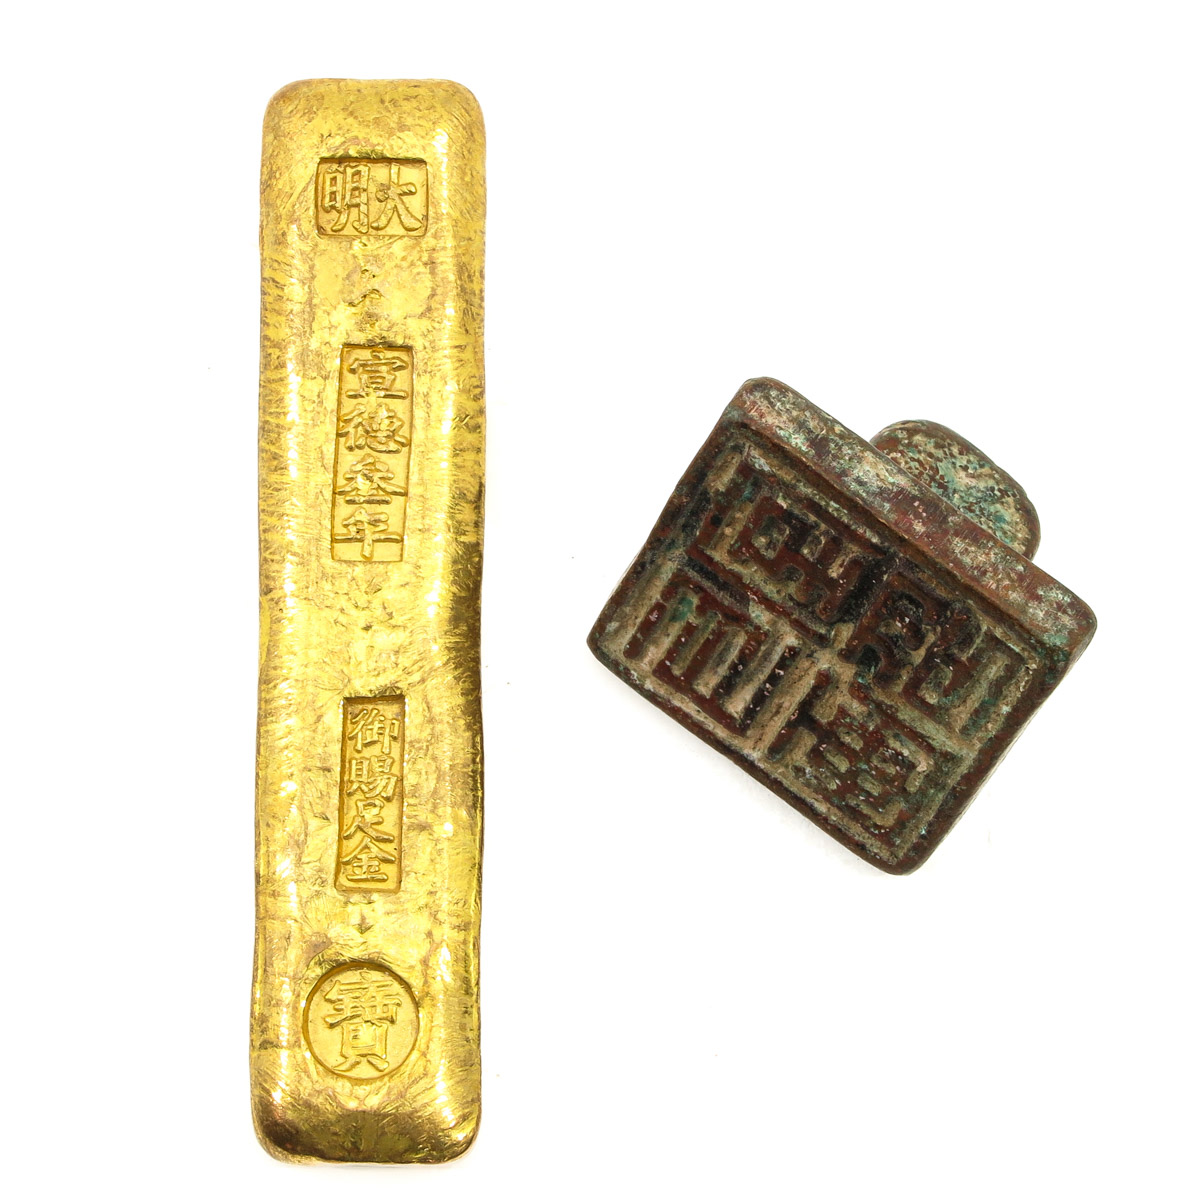 A Chinese Metal Seal and Weight